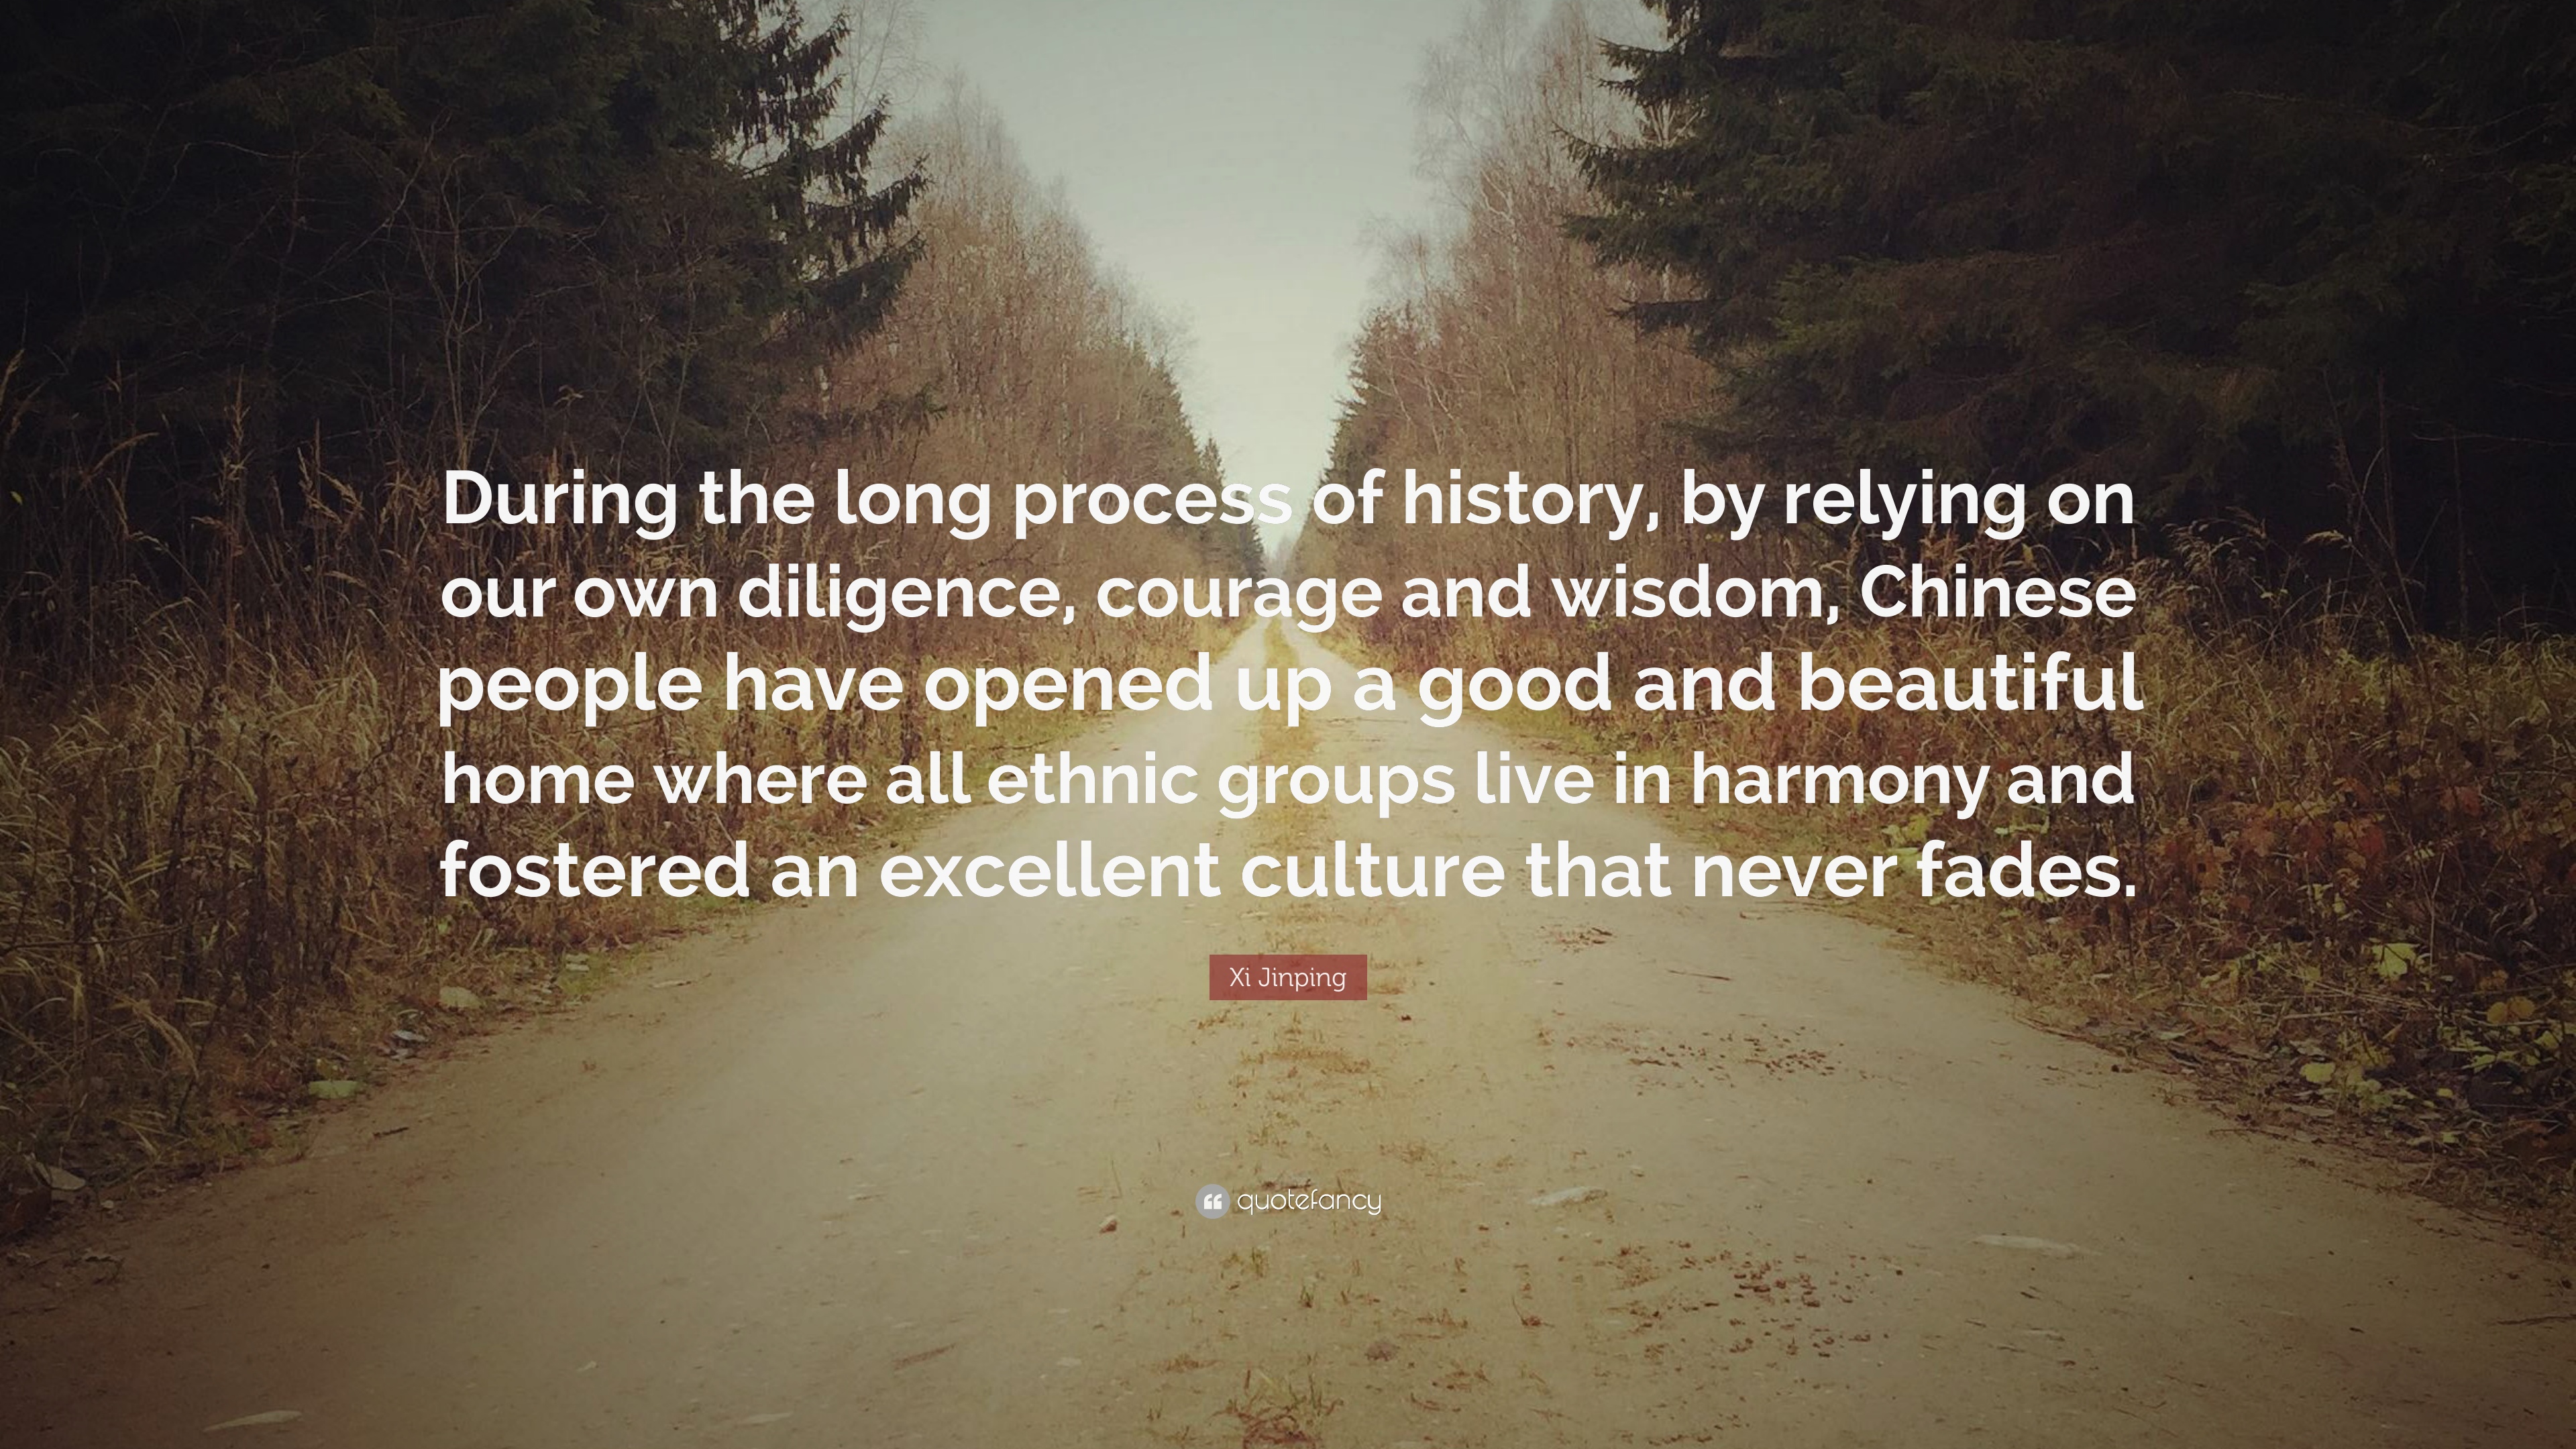 Xi Jinping Quote: “During the long process of history, by